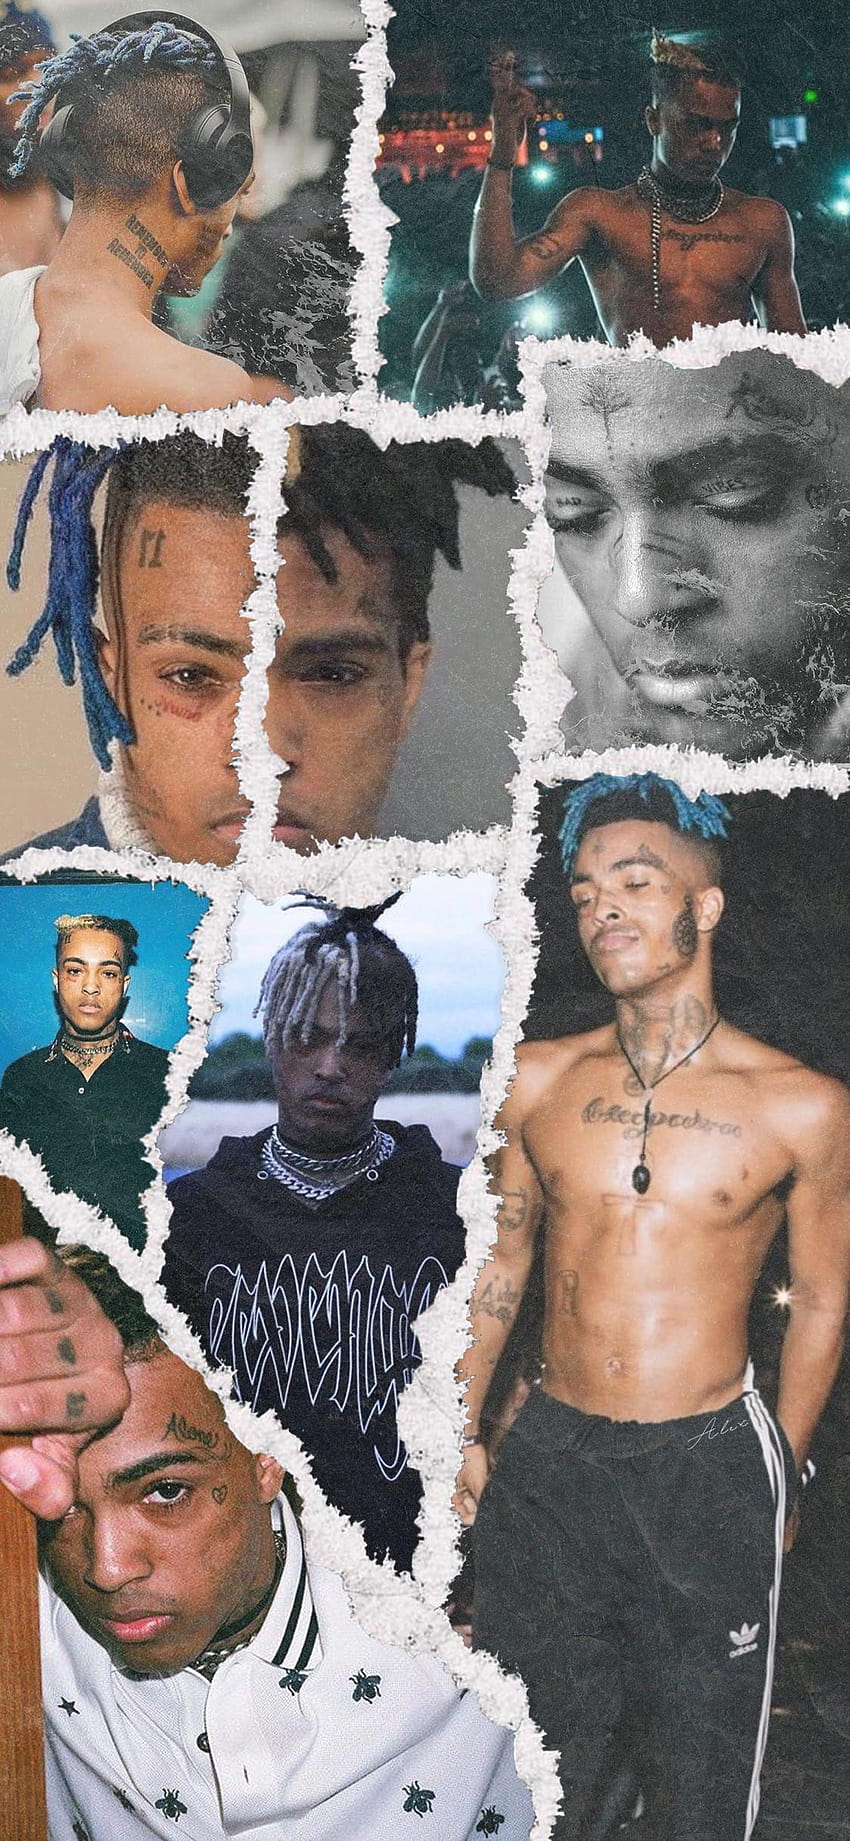 Xxxtentacion Art posted by Sarah Anderson, xxxtentacion and ynw melly HD phone wallpaper